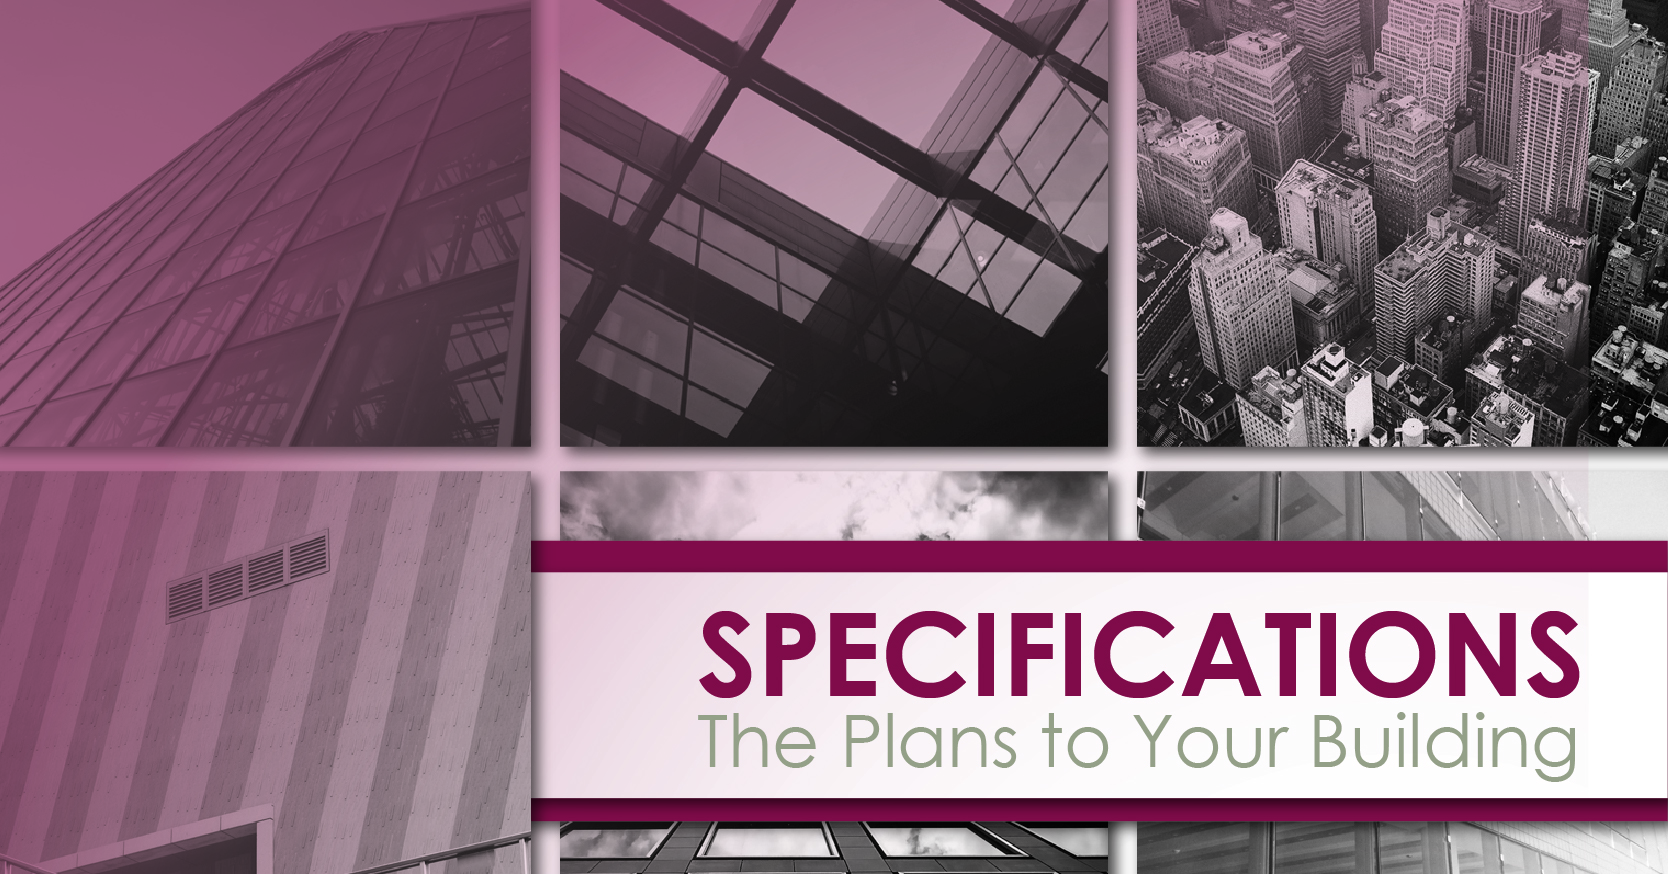 Specifications are the plans to your building!